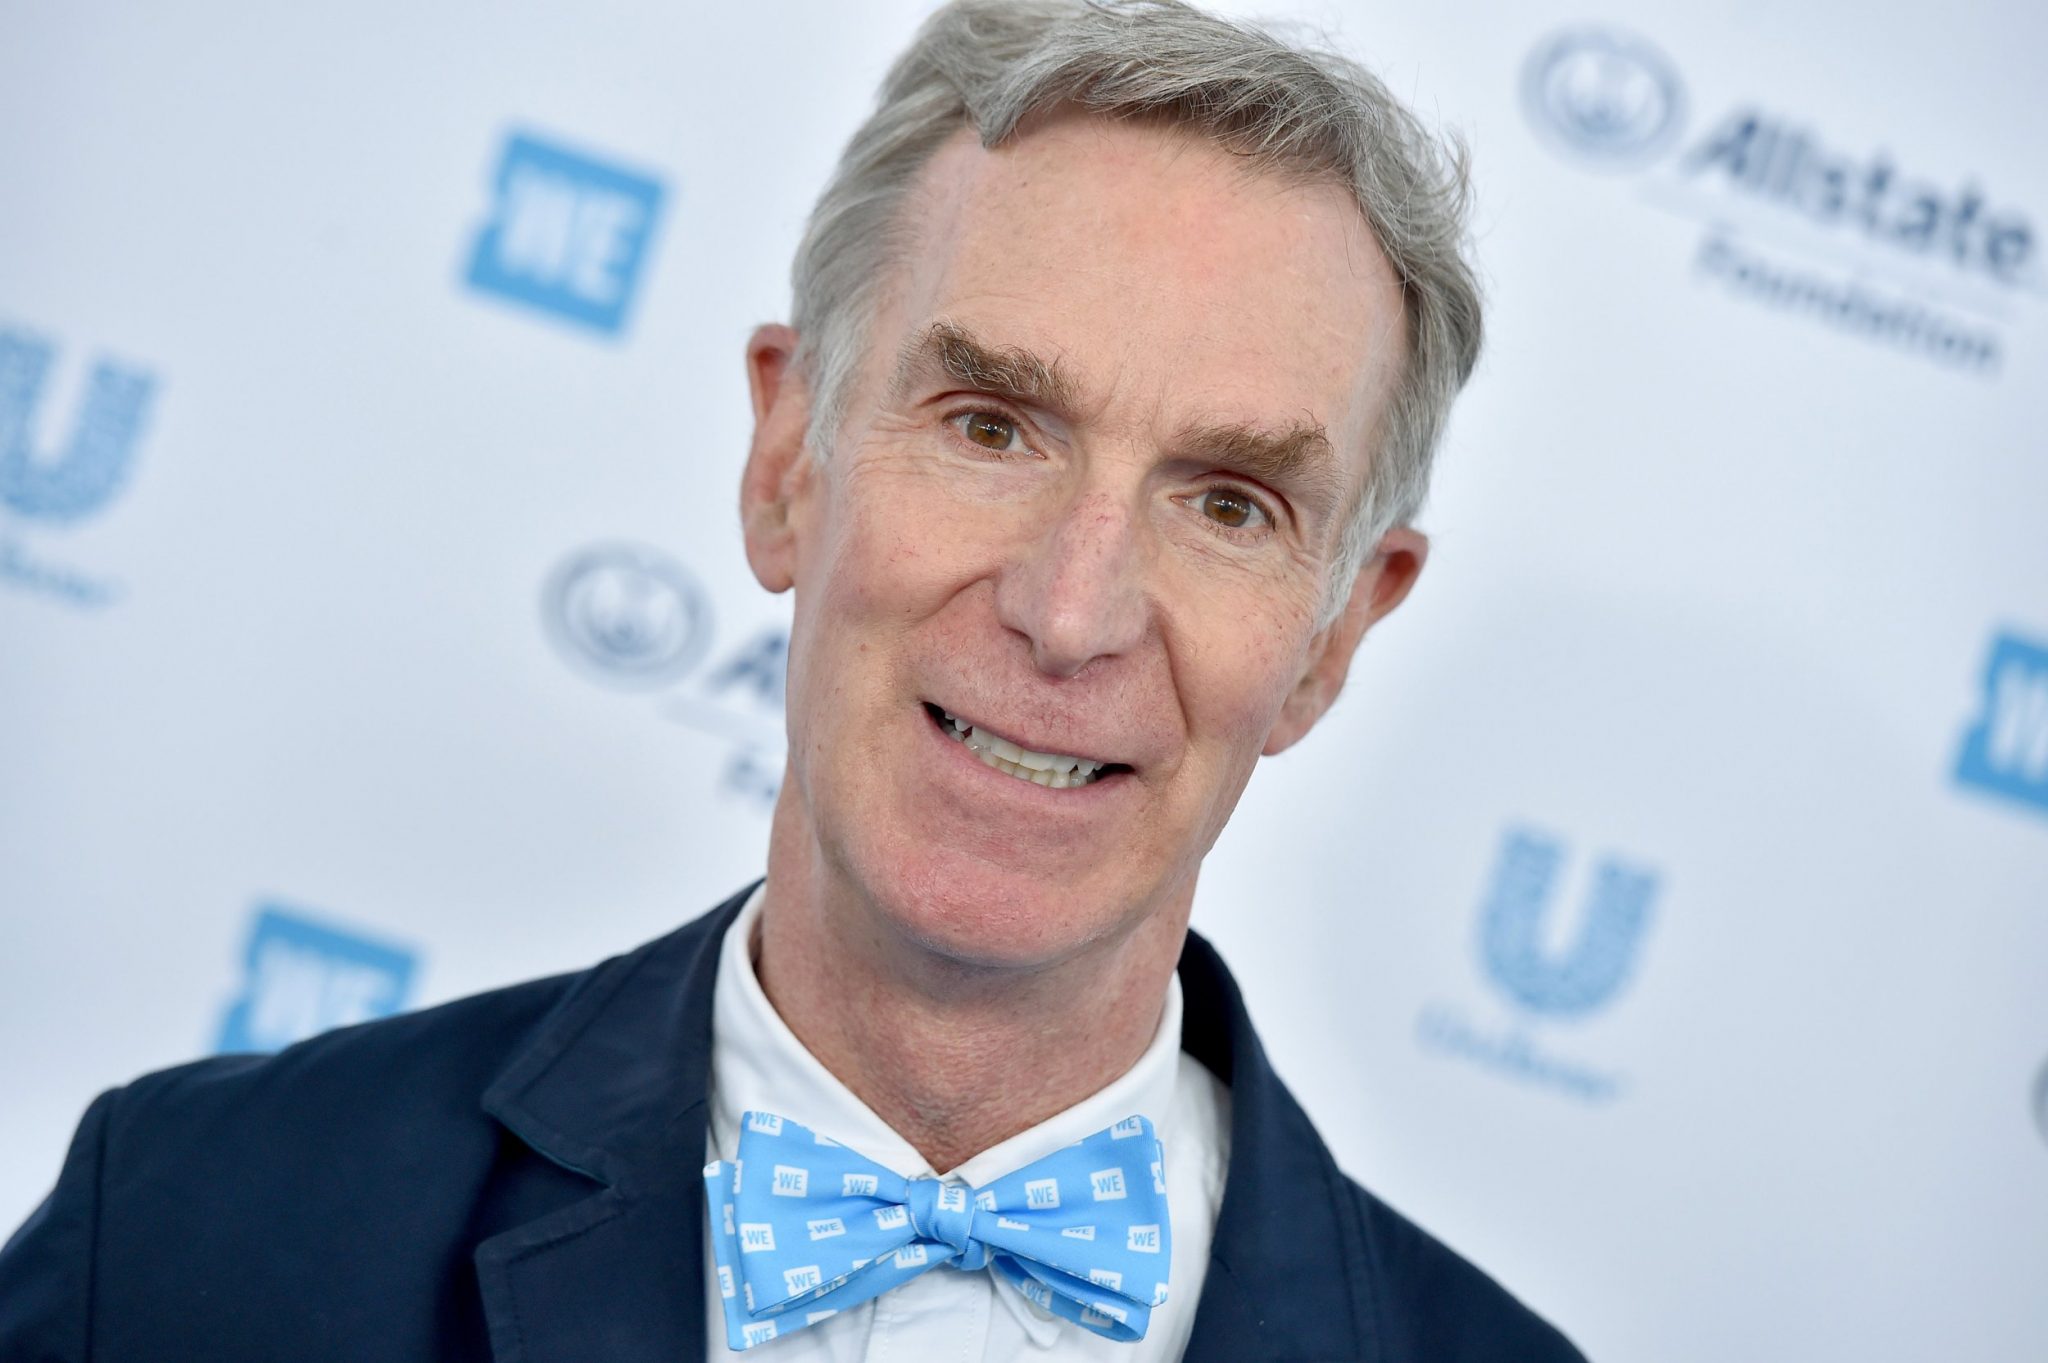 Thank Goodness! Bill Nye The Science Guy Has Changed His Name To Bill